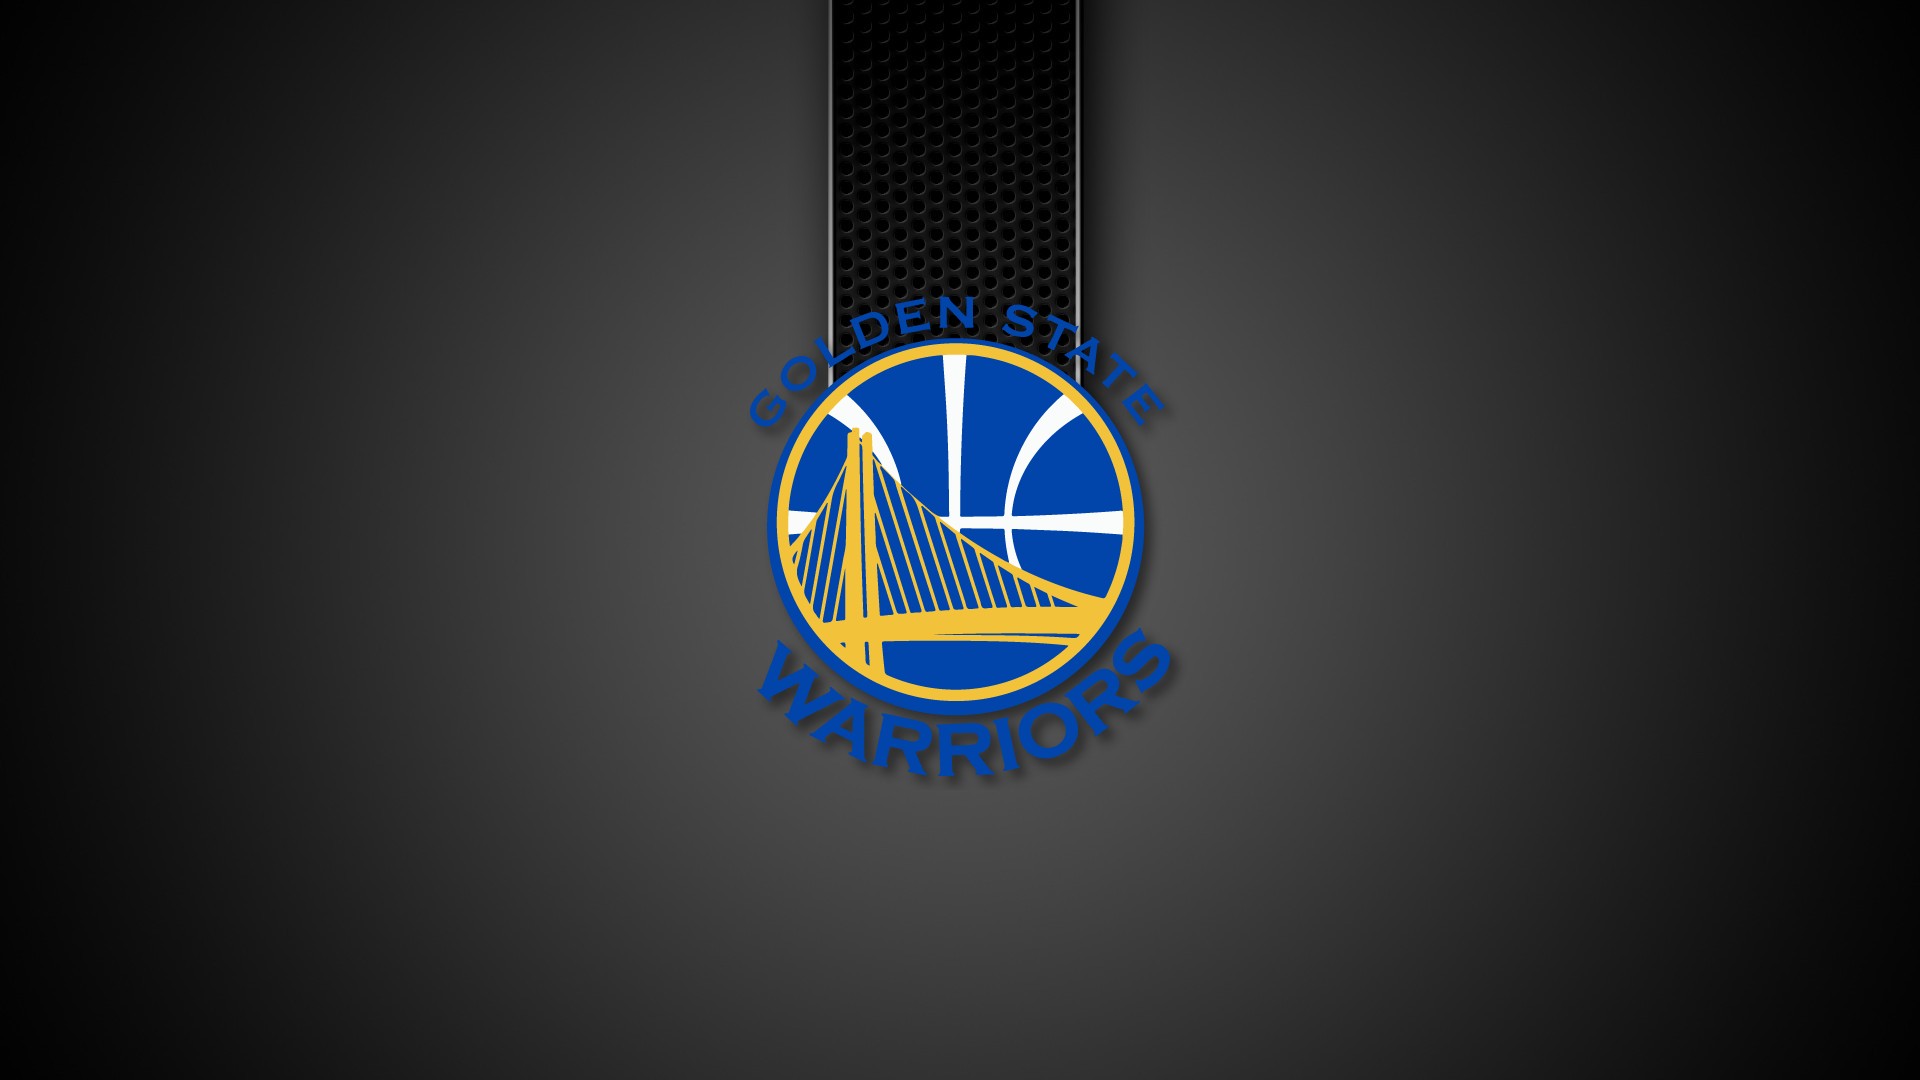 Wallpapers Hd Golden State Warriors Nba With Image - Nba Hd Wallpaper Golden State Warriors - HD Wallpaper 